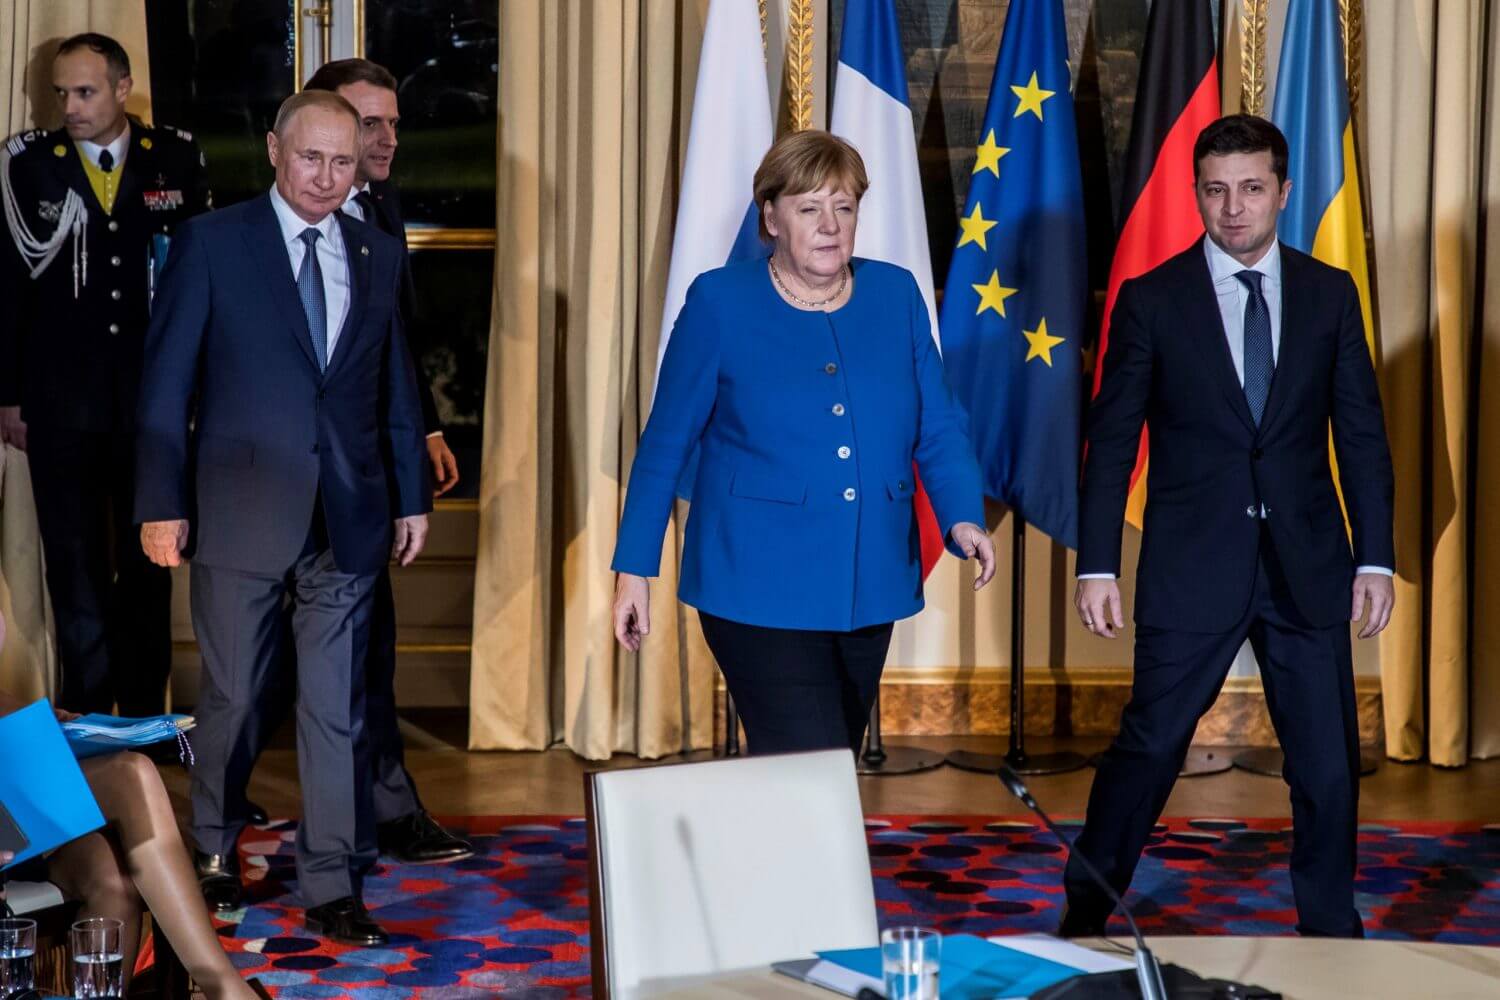 Merkel and Macron Discuss Donbas Conflict With Zelensky and Putin